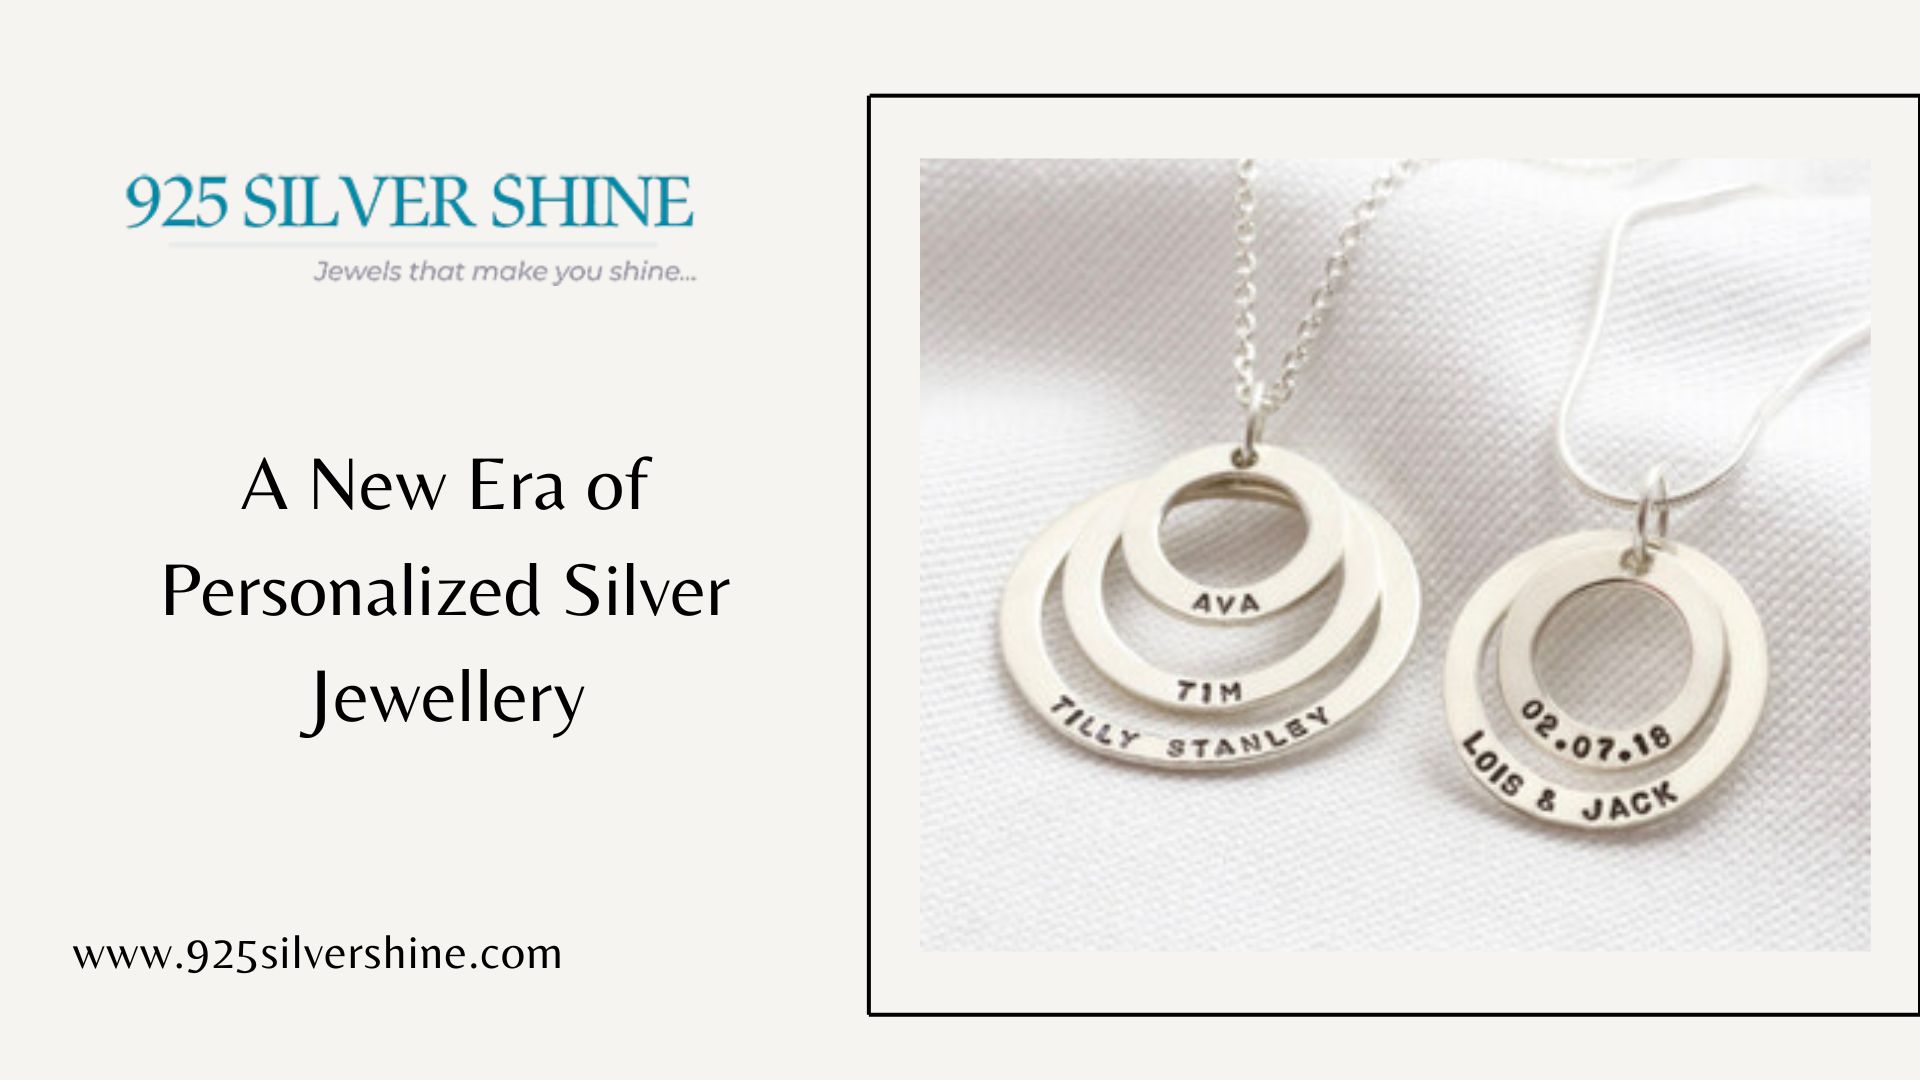 A New Era of Personalized Silver Jewellery